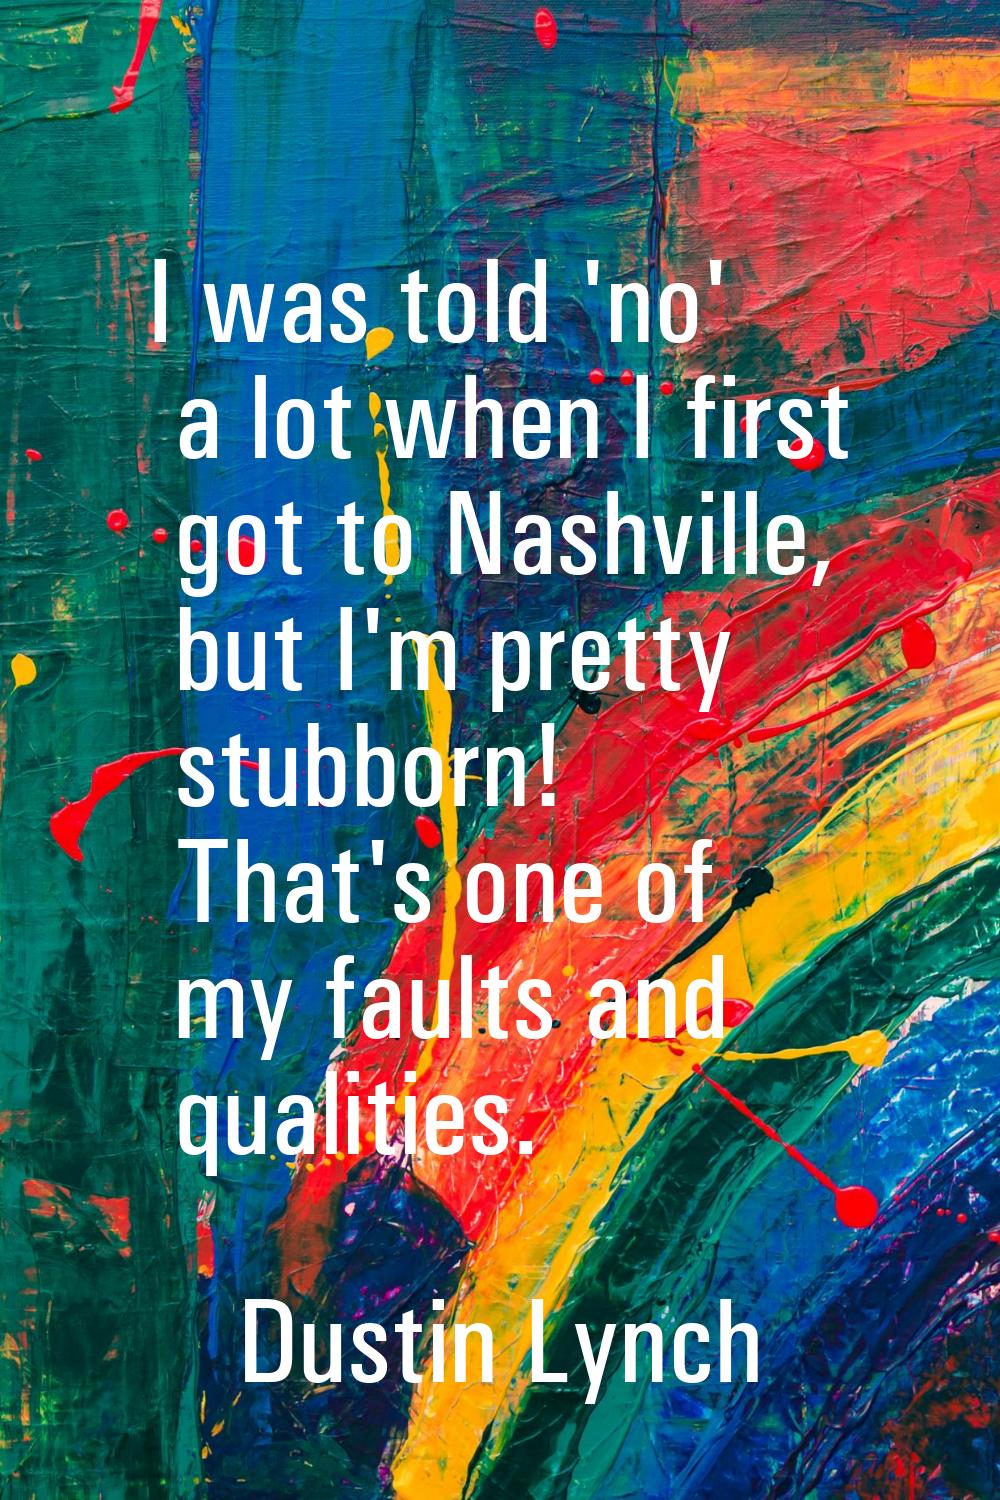 I was told 'no' a lot when I first got to Nashville, but I'm pretty stubborn! That's one of my faul